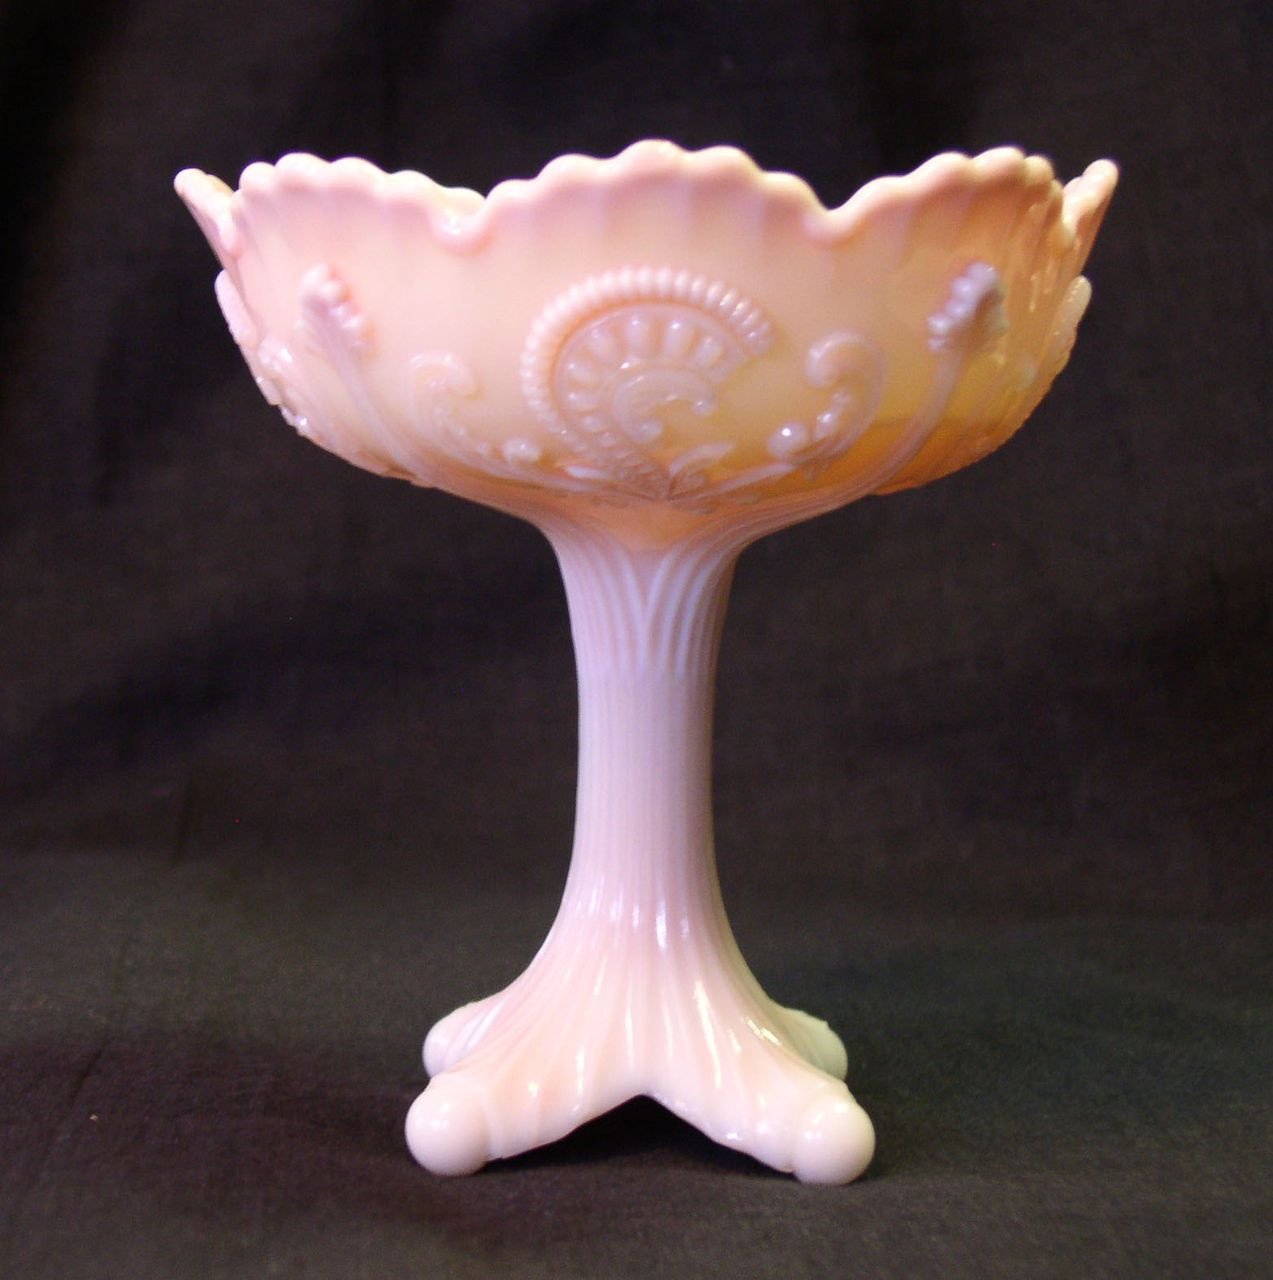 pink milk glass vase of http www allantiqueglass com inverted fan and feather pink slag intended for northwood glass inverted fan and feather pink slag glass jelly comport pink slag glass was made for a very limited time and only in the inverted fan